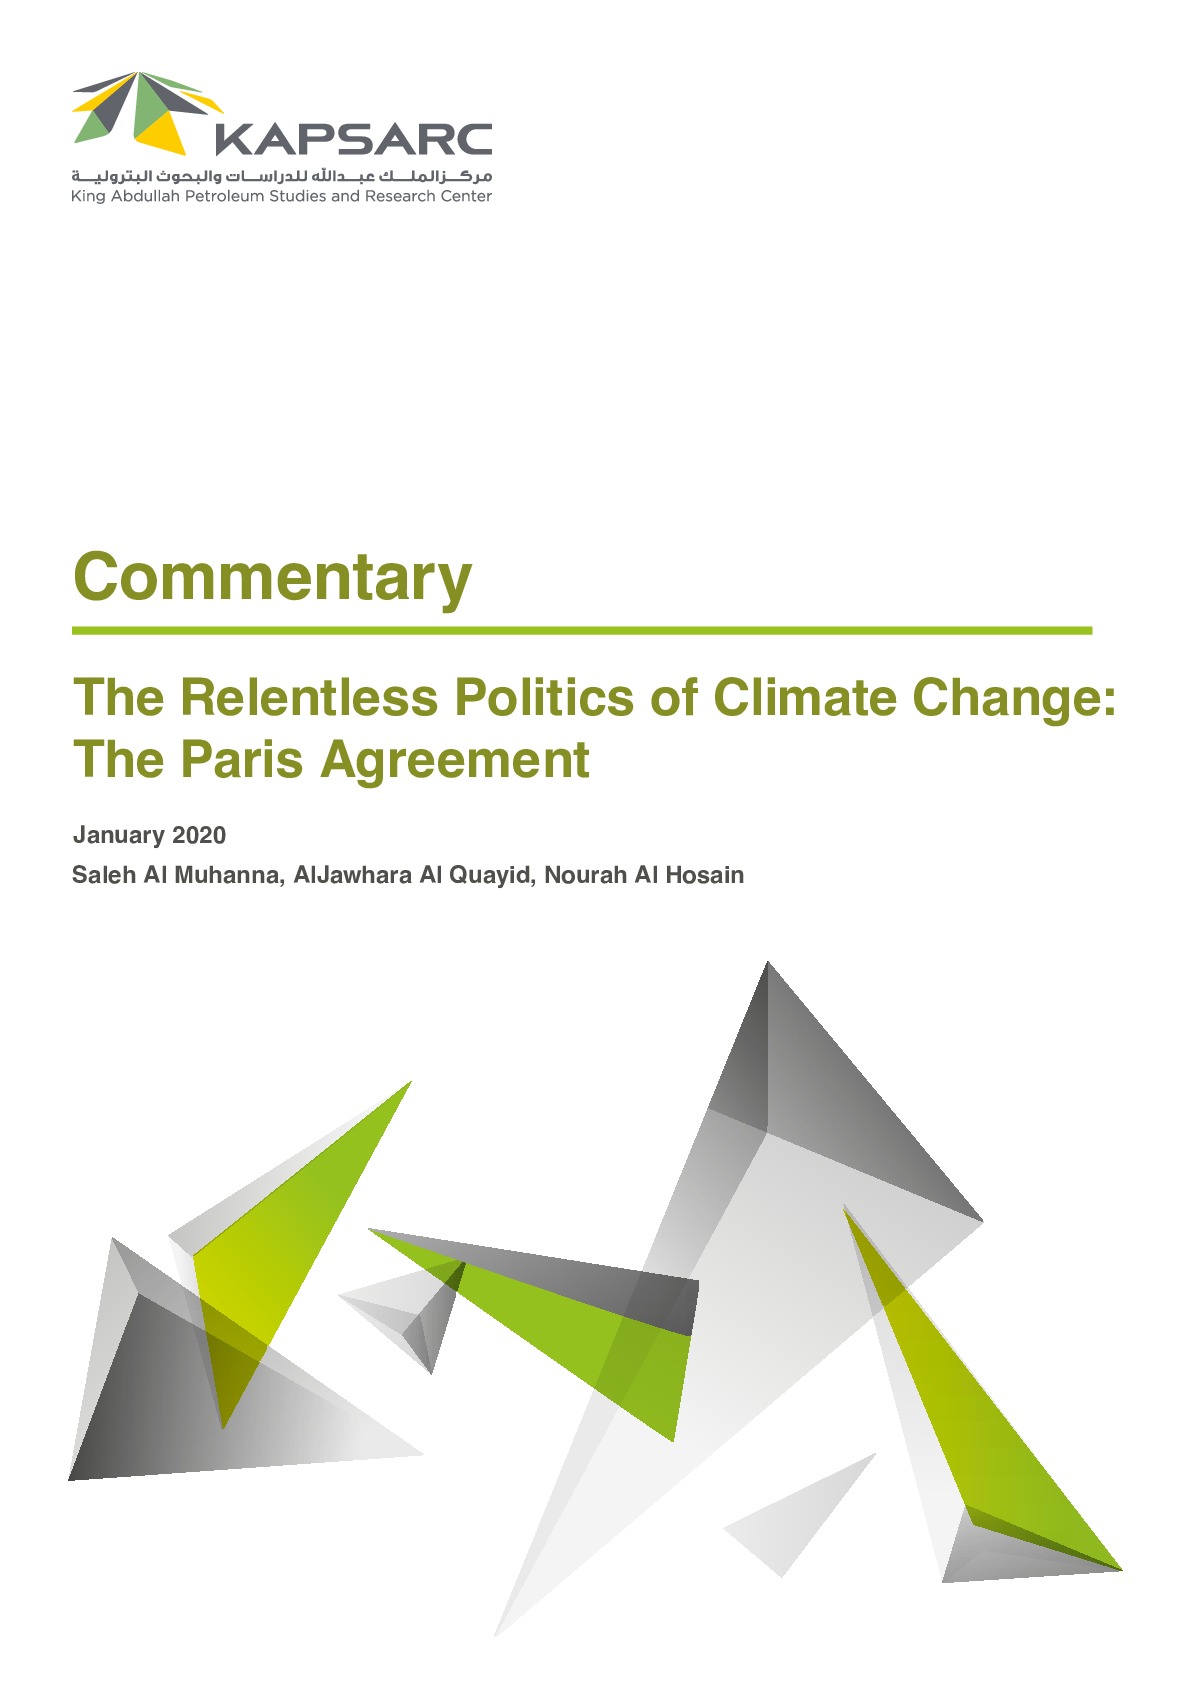 The Relentless Politics of Climate Change: The Paris Agreement